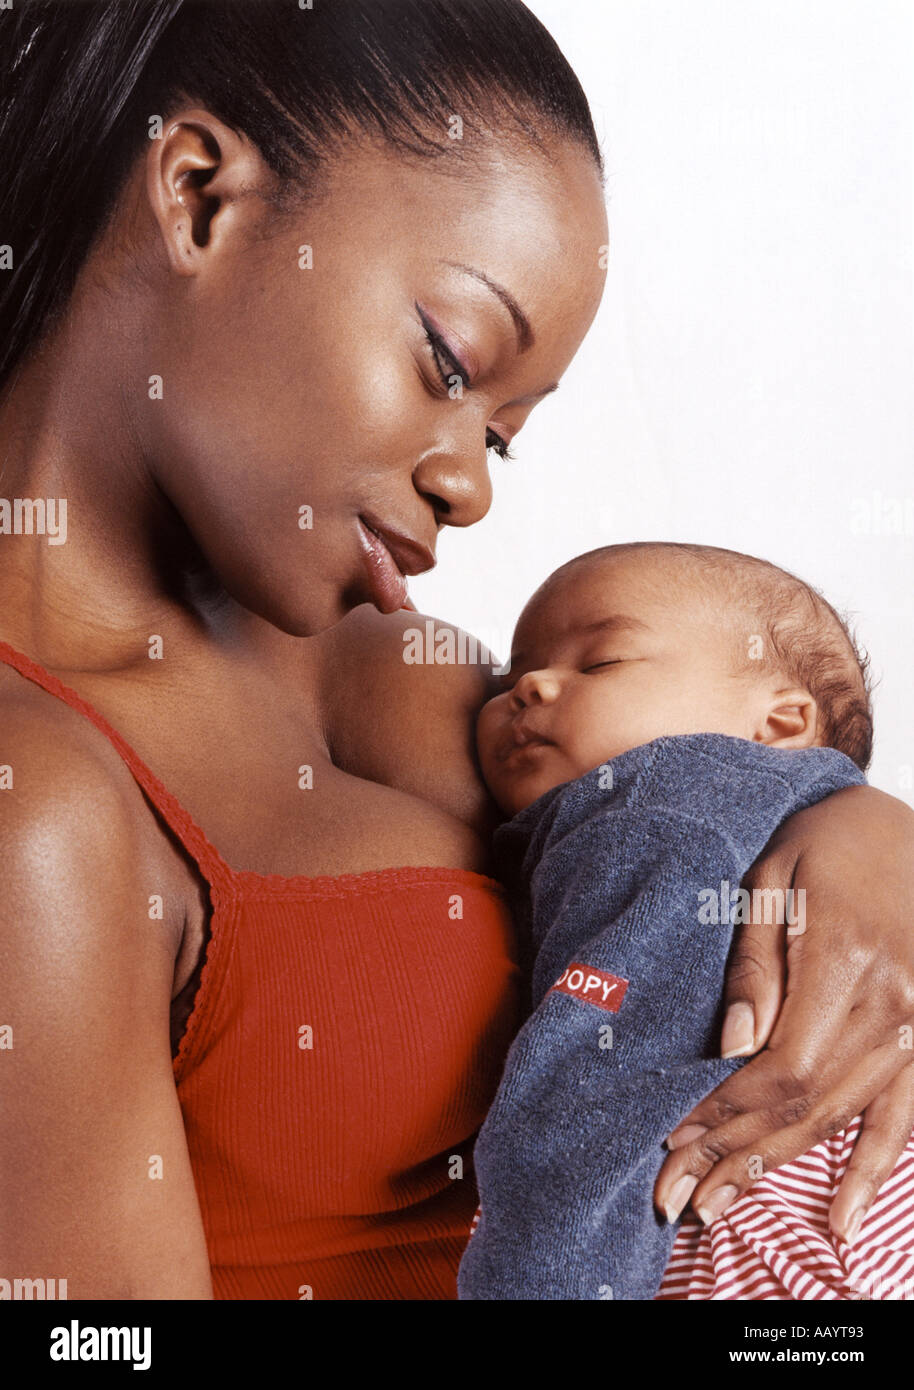 Portrait of a Black Woman with a Baby Stock Photo